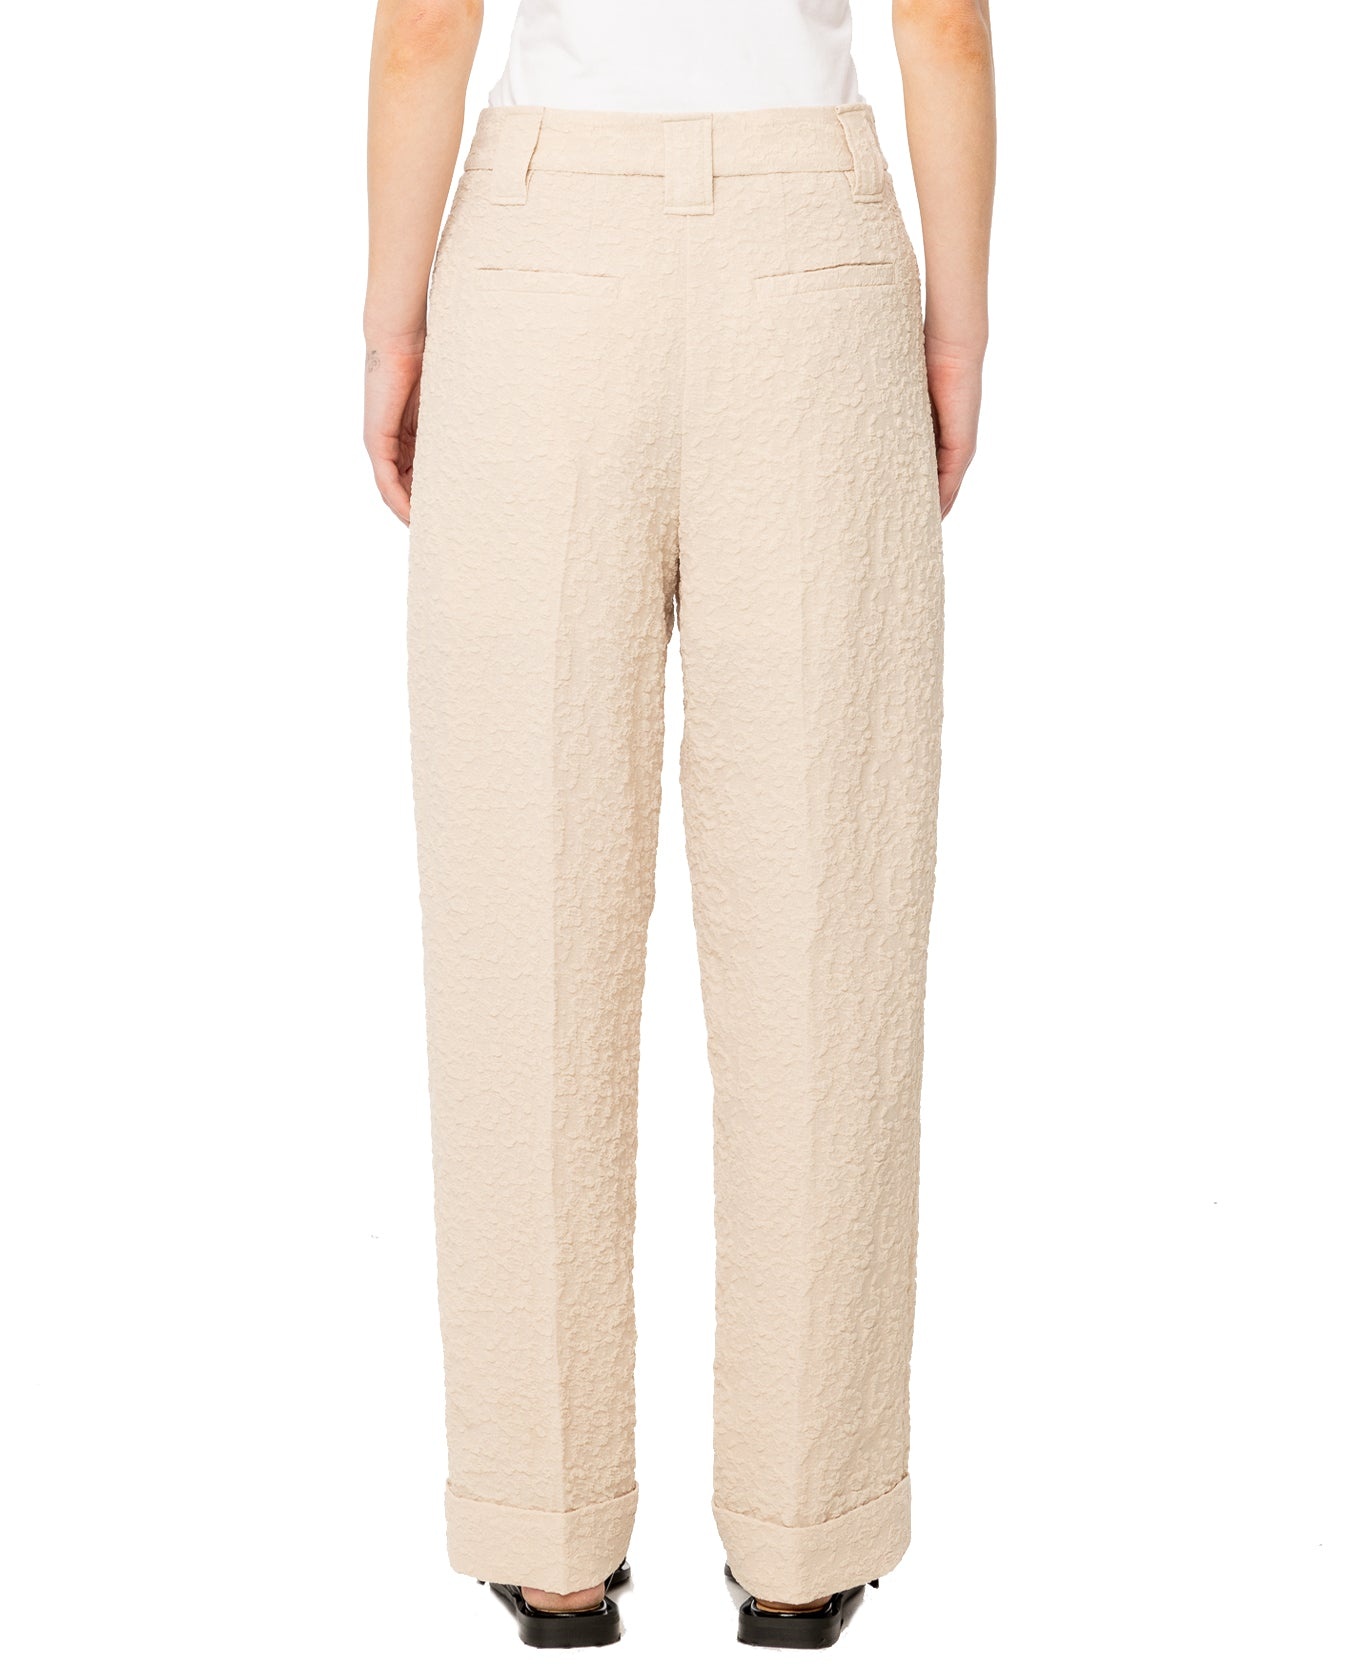 Textured Suiting Mid Waist Pants - 4